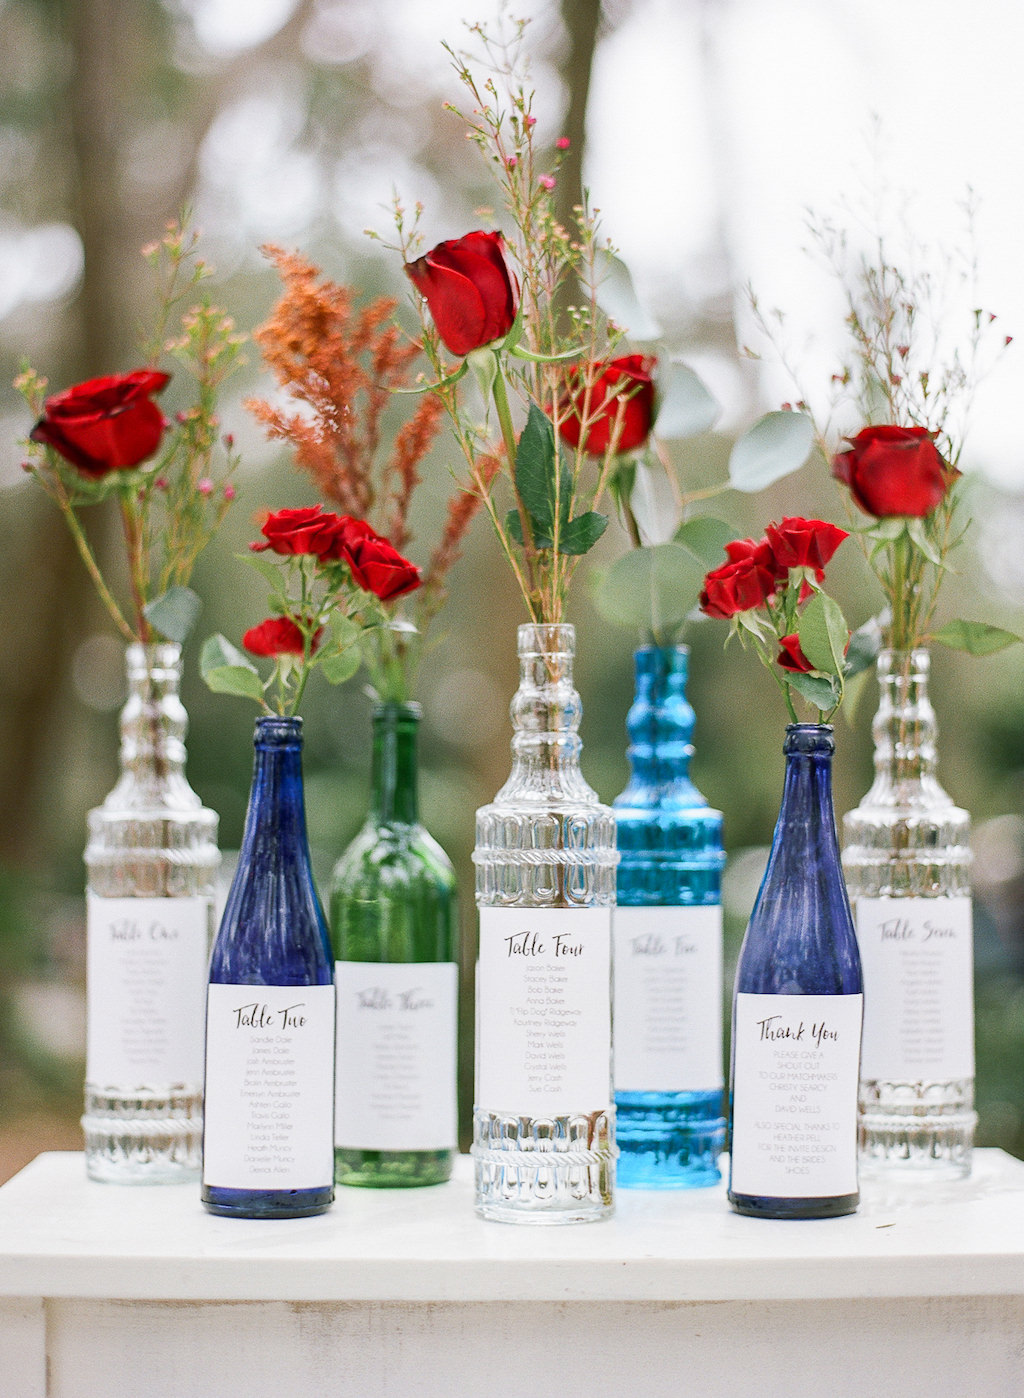 Vintage Inspired Wedding Reception Decor, Antique Blue, Clear and Green Bottle with Red Roses and Table Seating Chart